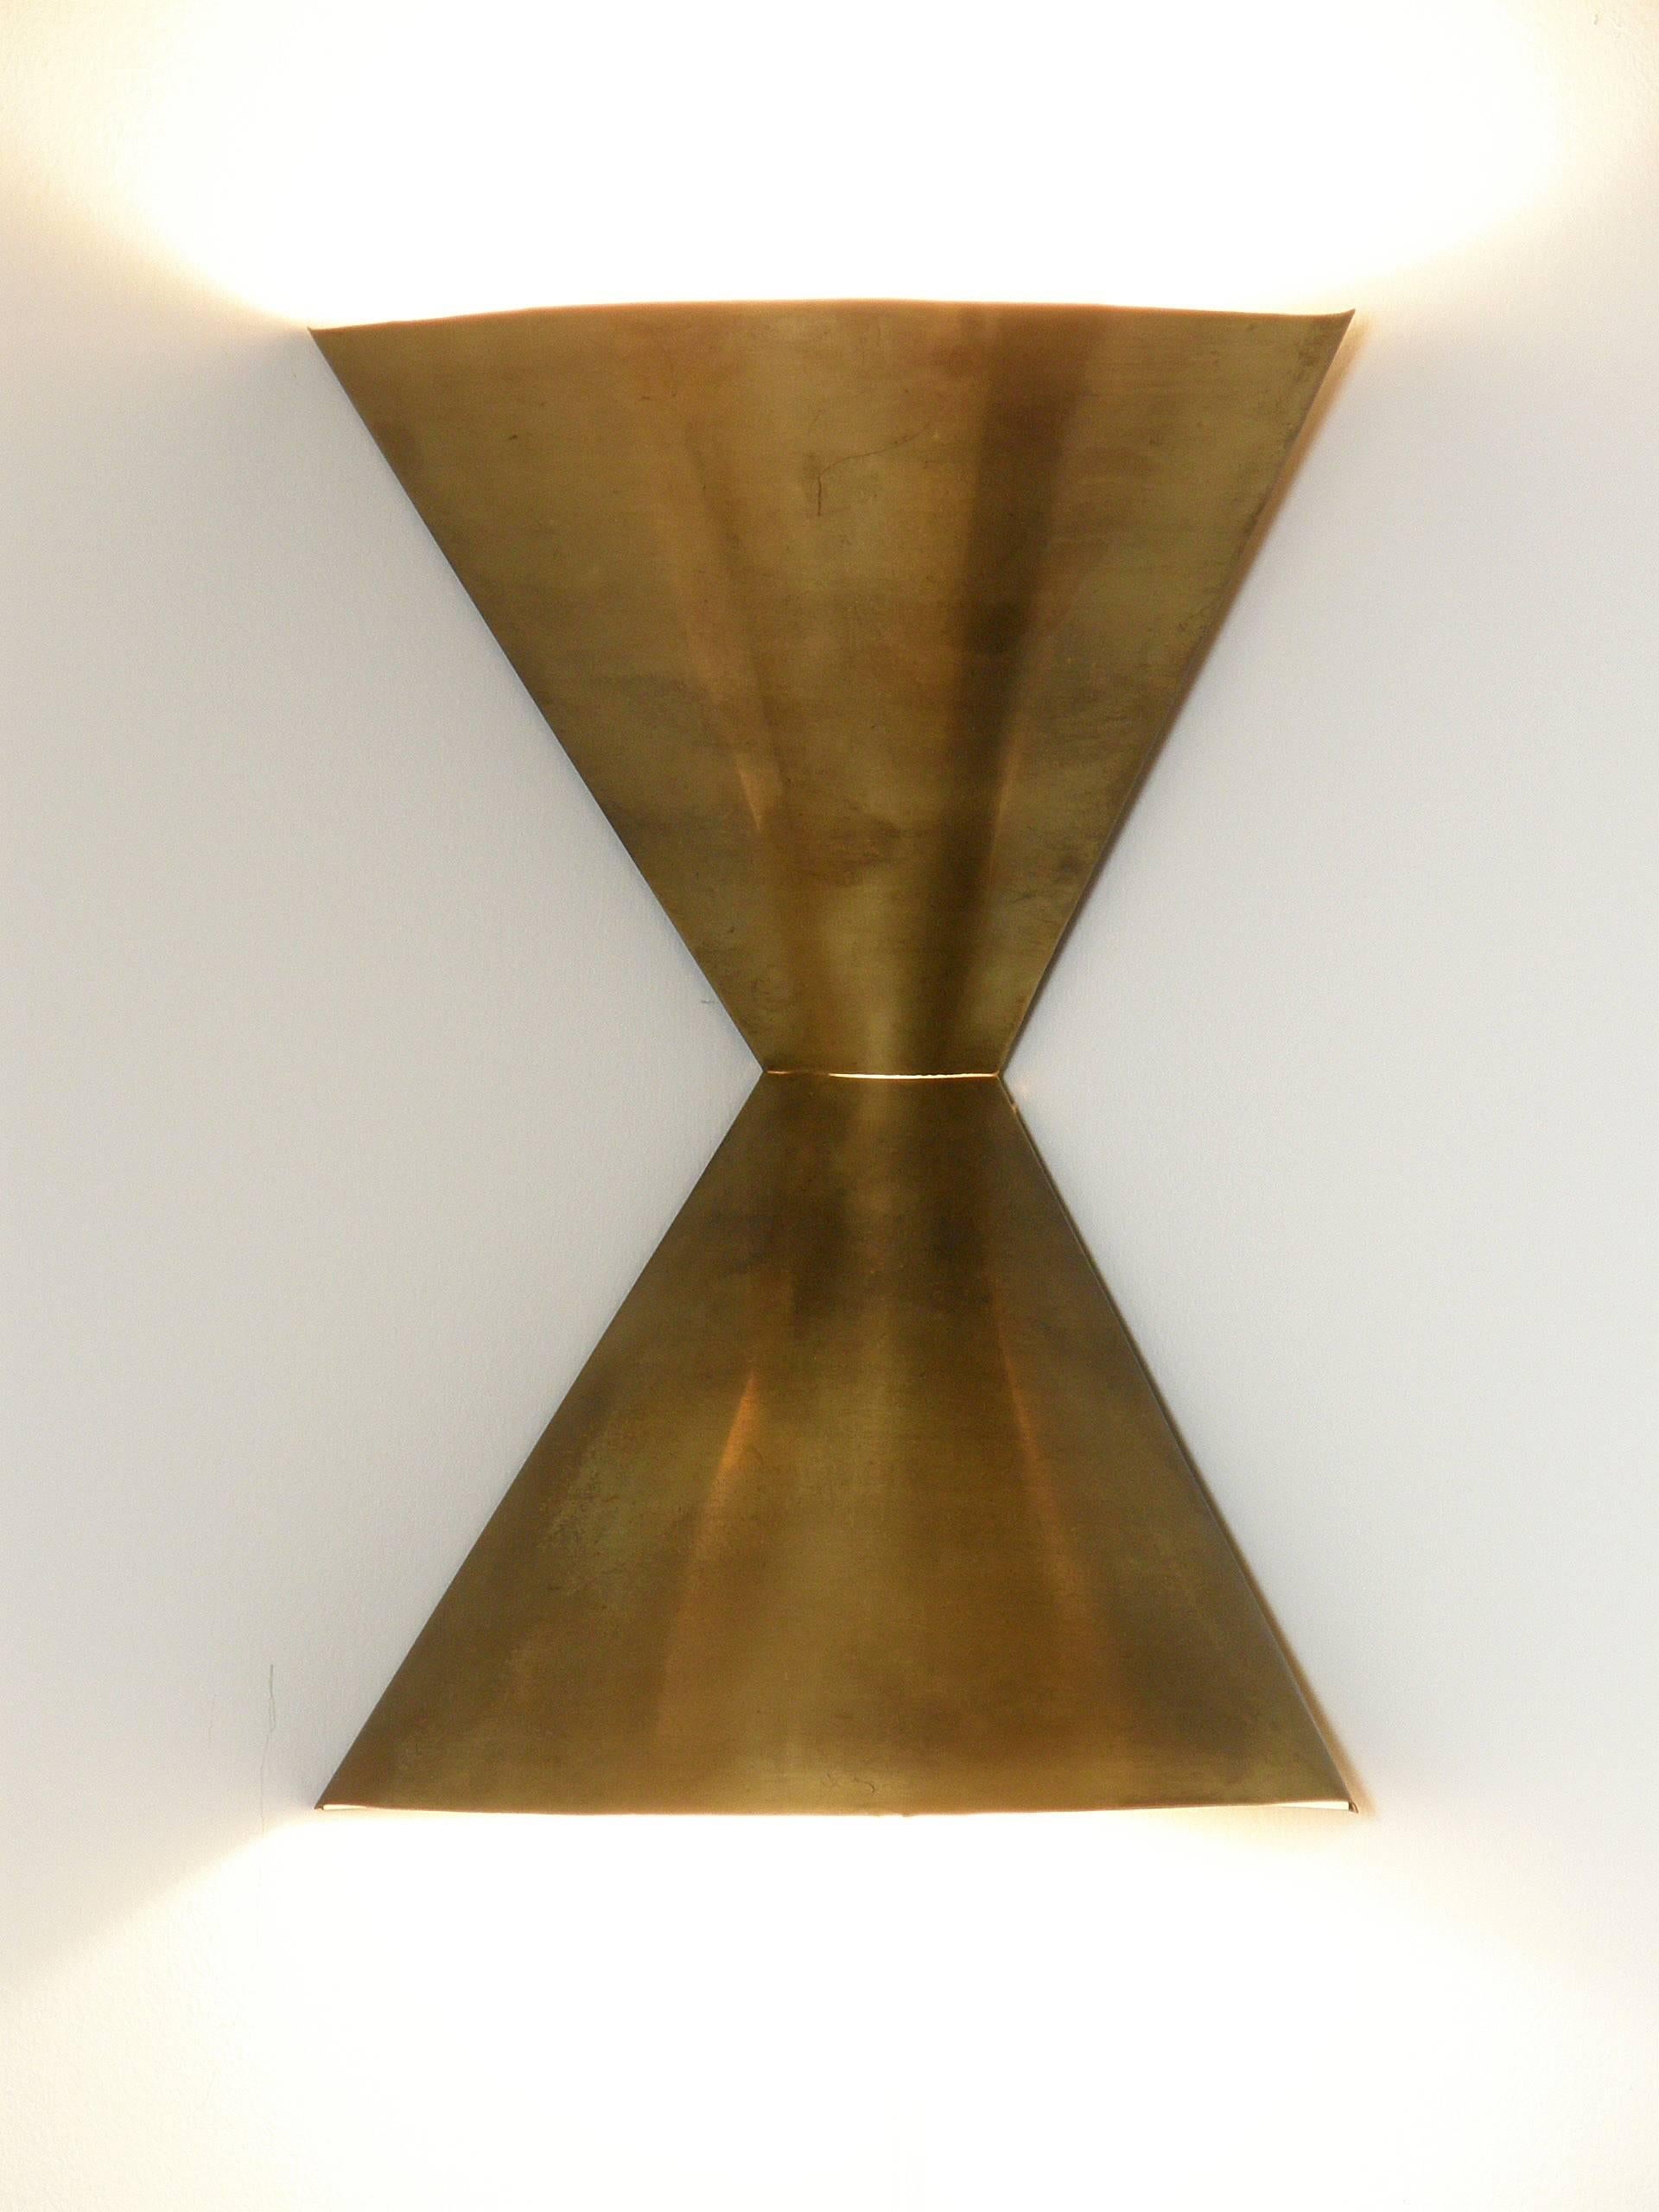 Mid-Century Modern Edward Wormley Brass Corner Lamps for Lightolier with Upward and Downward Light